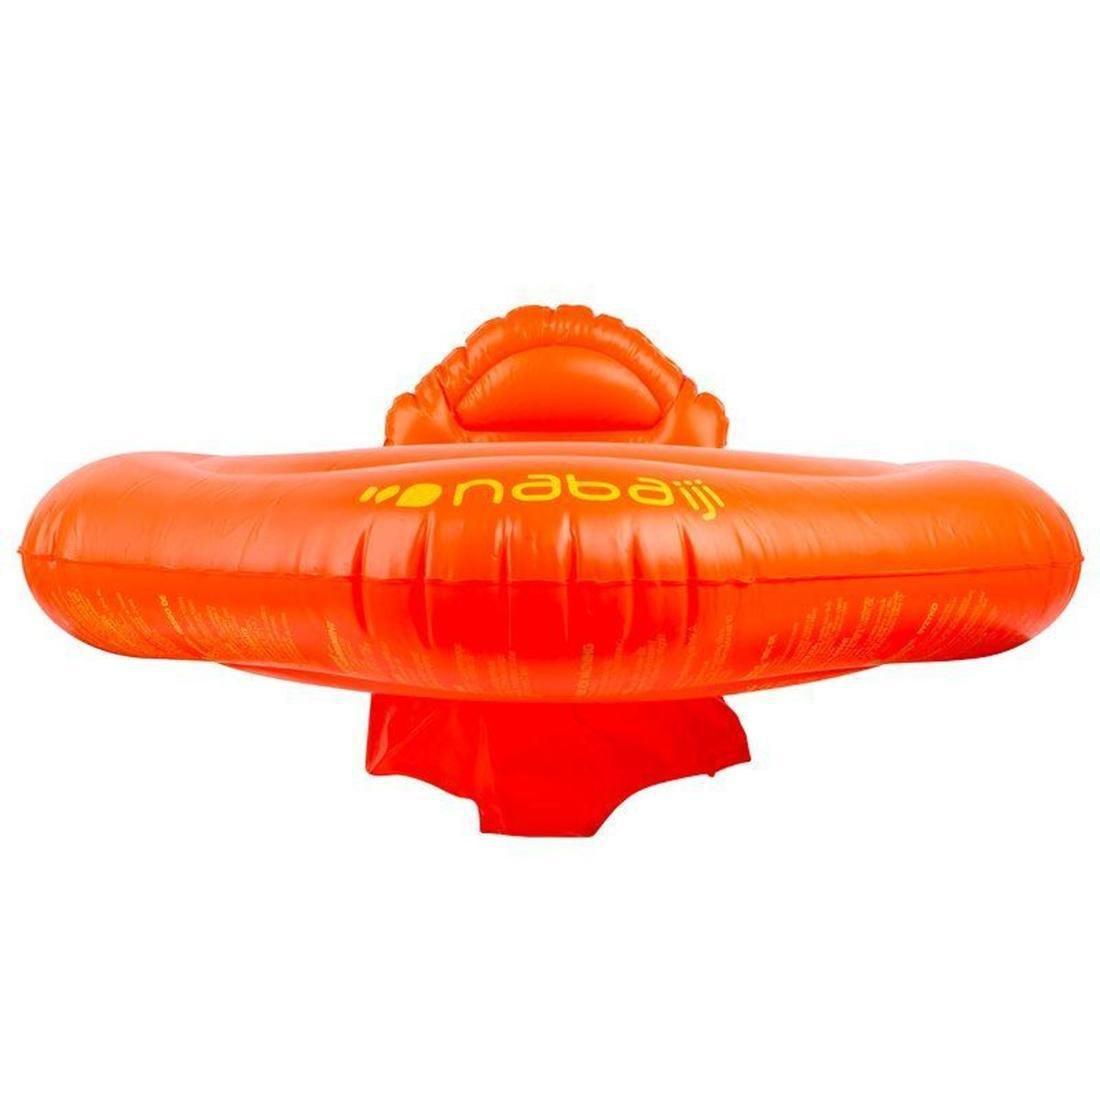 NABAIJI - Baby's orange inflatable swim ring with seat for infants weighing  11- 15 kg